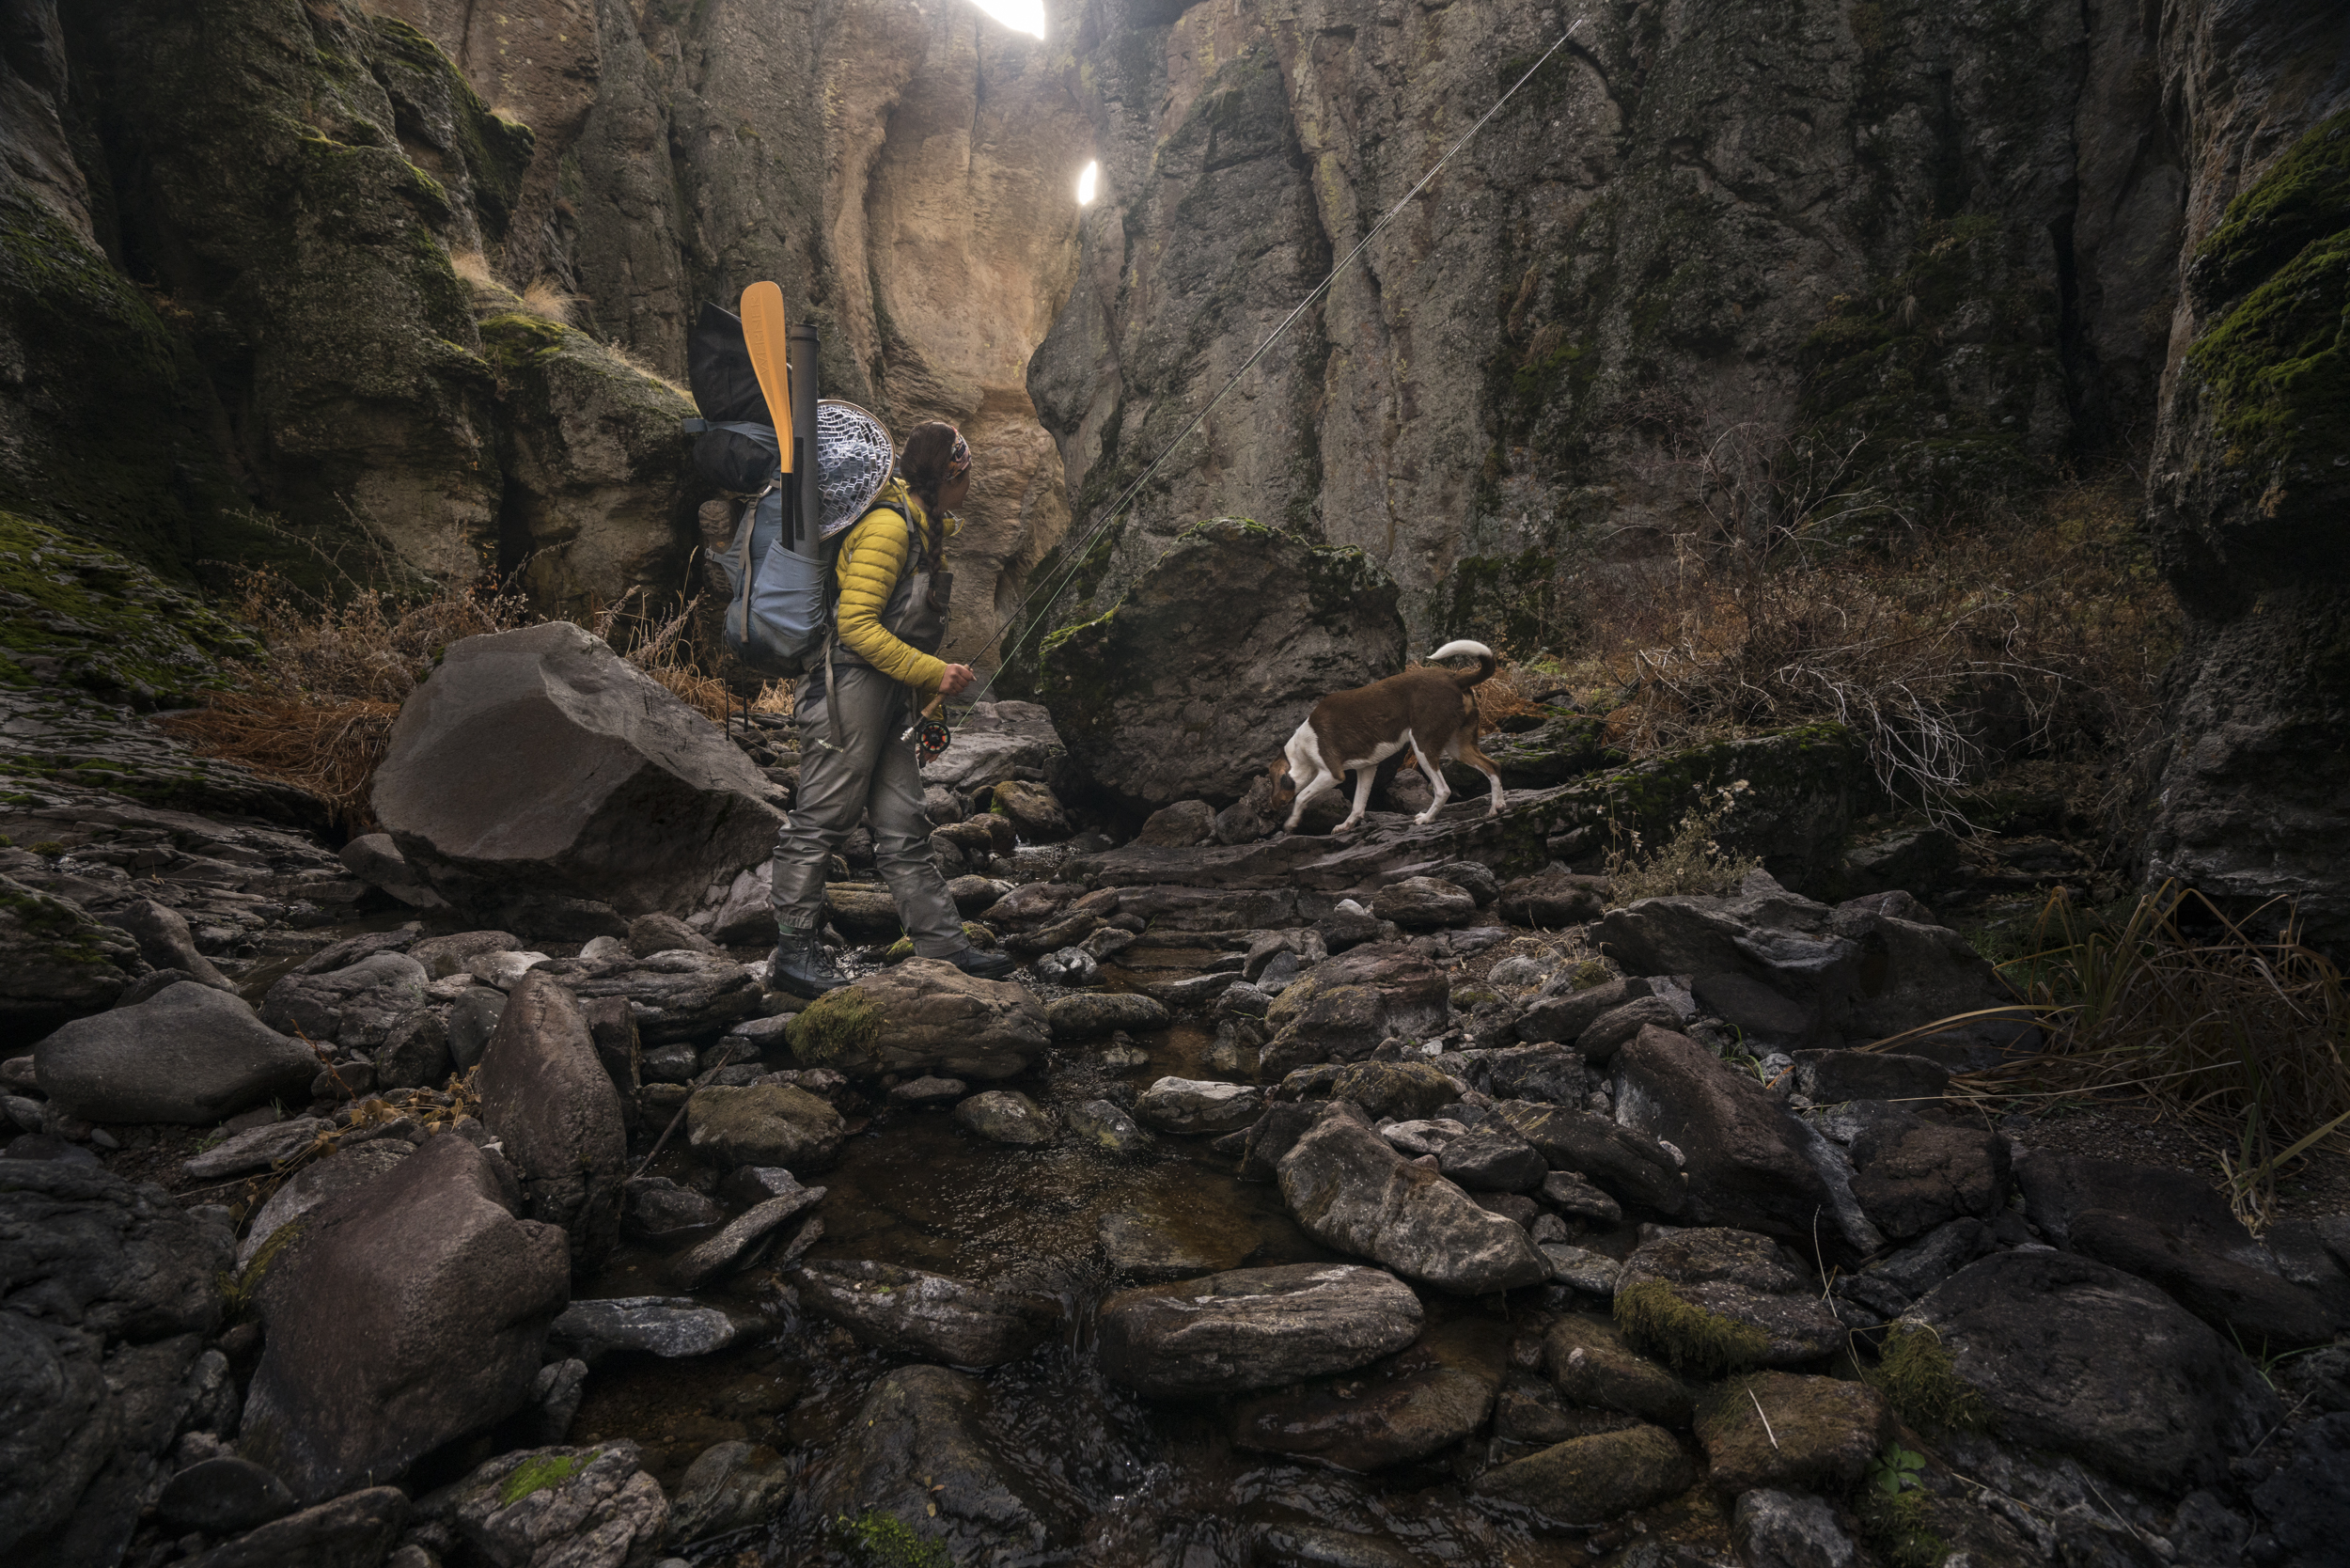  Descending into the underworld of Oregon's Owyhee Canyonlands,&nbsp; a &nbsp;hiker and her nimble hound navigate a labyrinth of steep walls and hoodoo spires in search of native redband trout.&nbsp;  Middle Fork Owyhee River, Oregon 